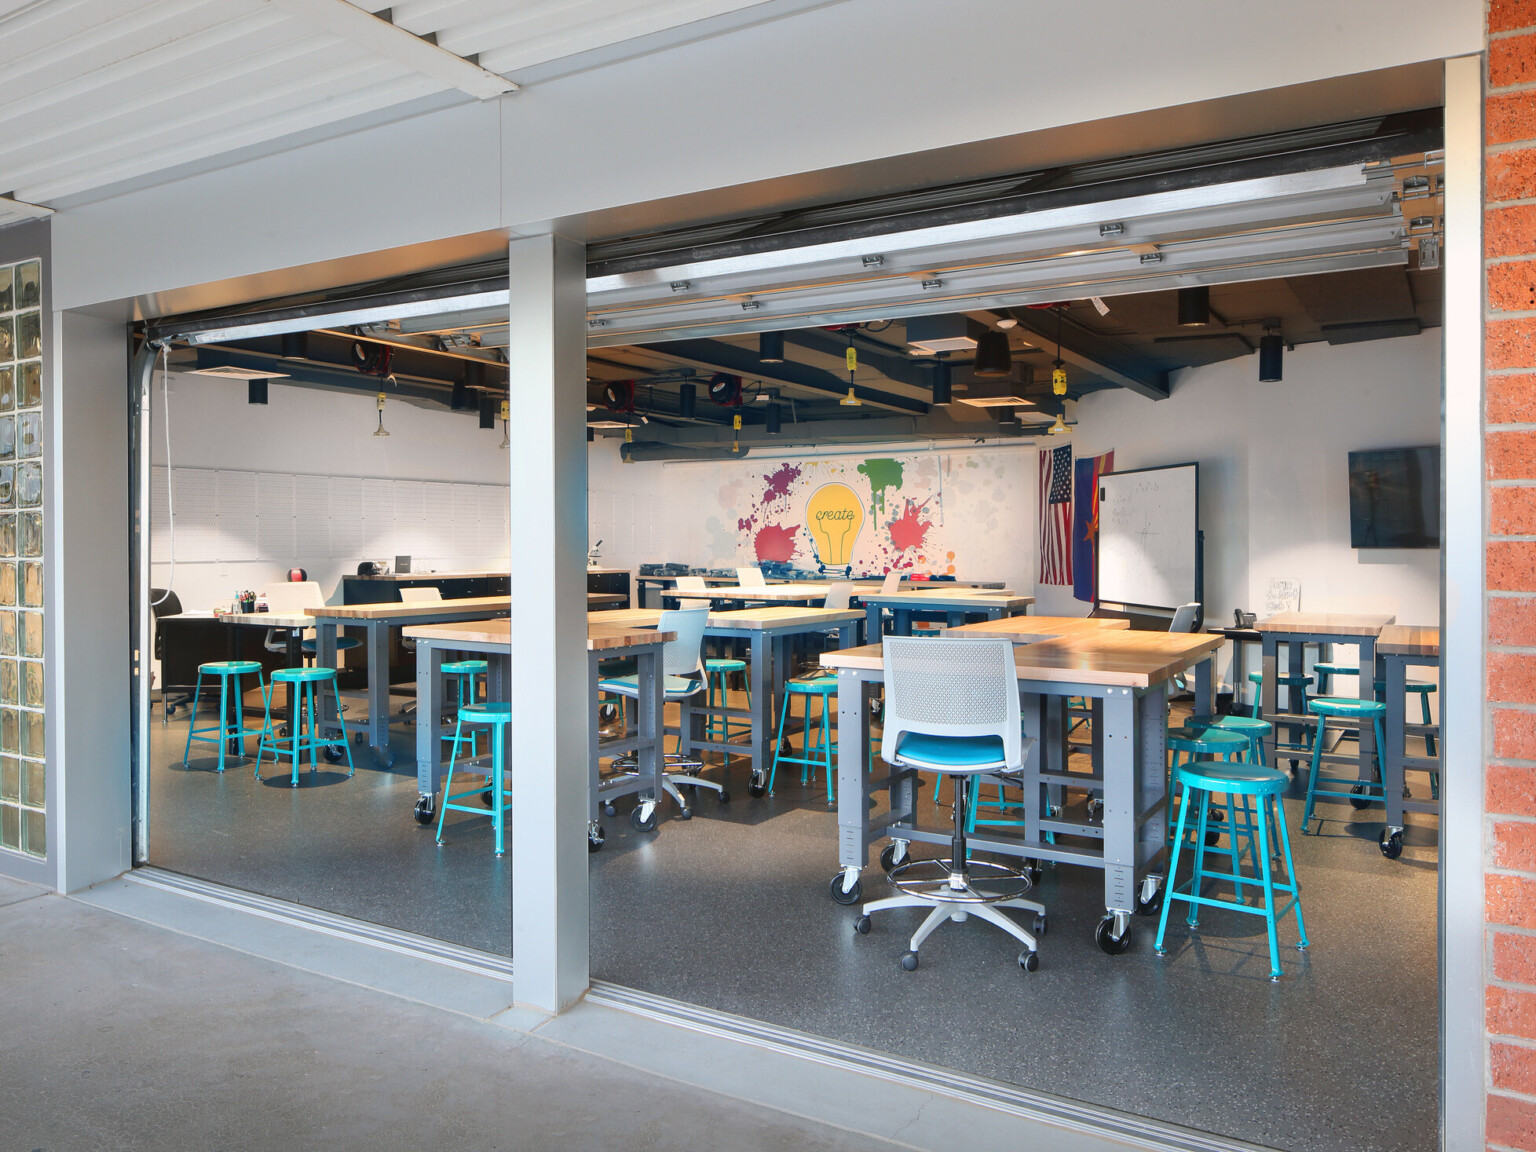 view from exterior: garage door in classroom when retracted brings the outdoors inside, turquoise modern steel stools, light wood tables, office chairs, white walls, polished concrete flooring